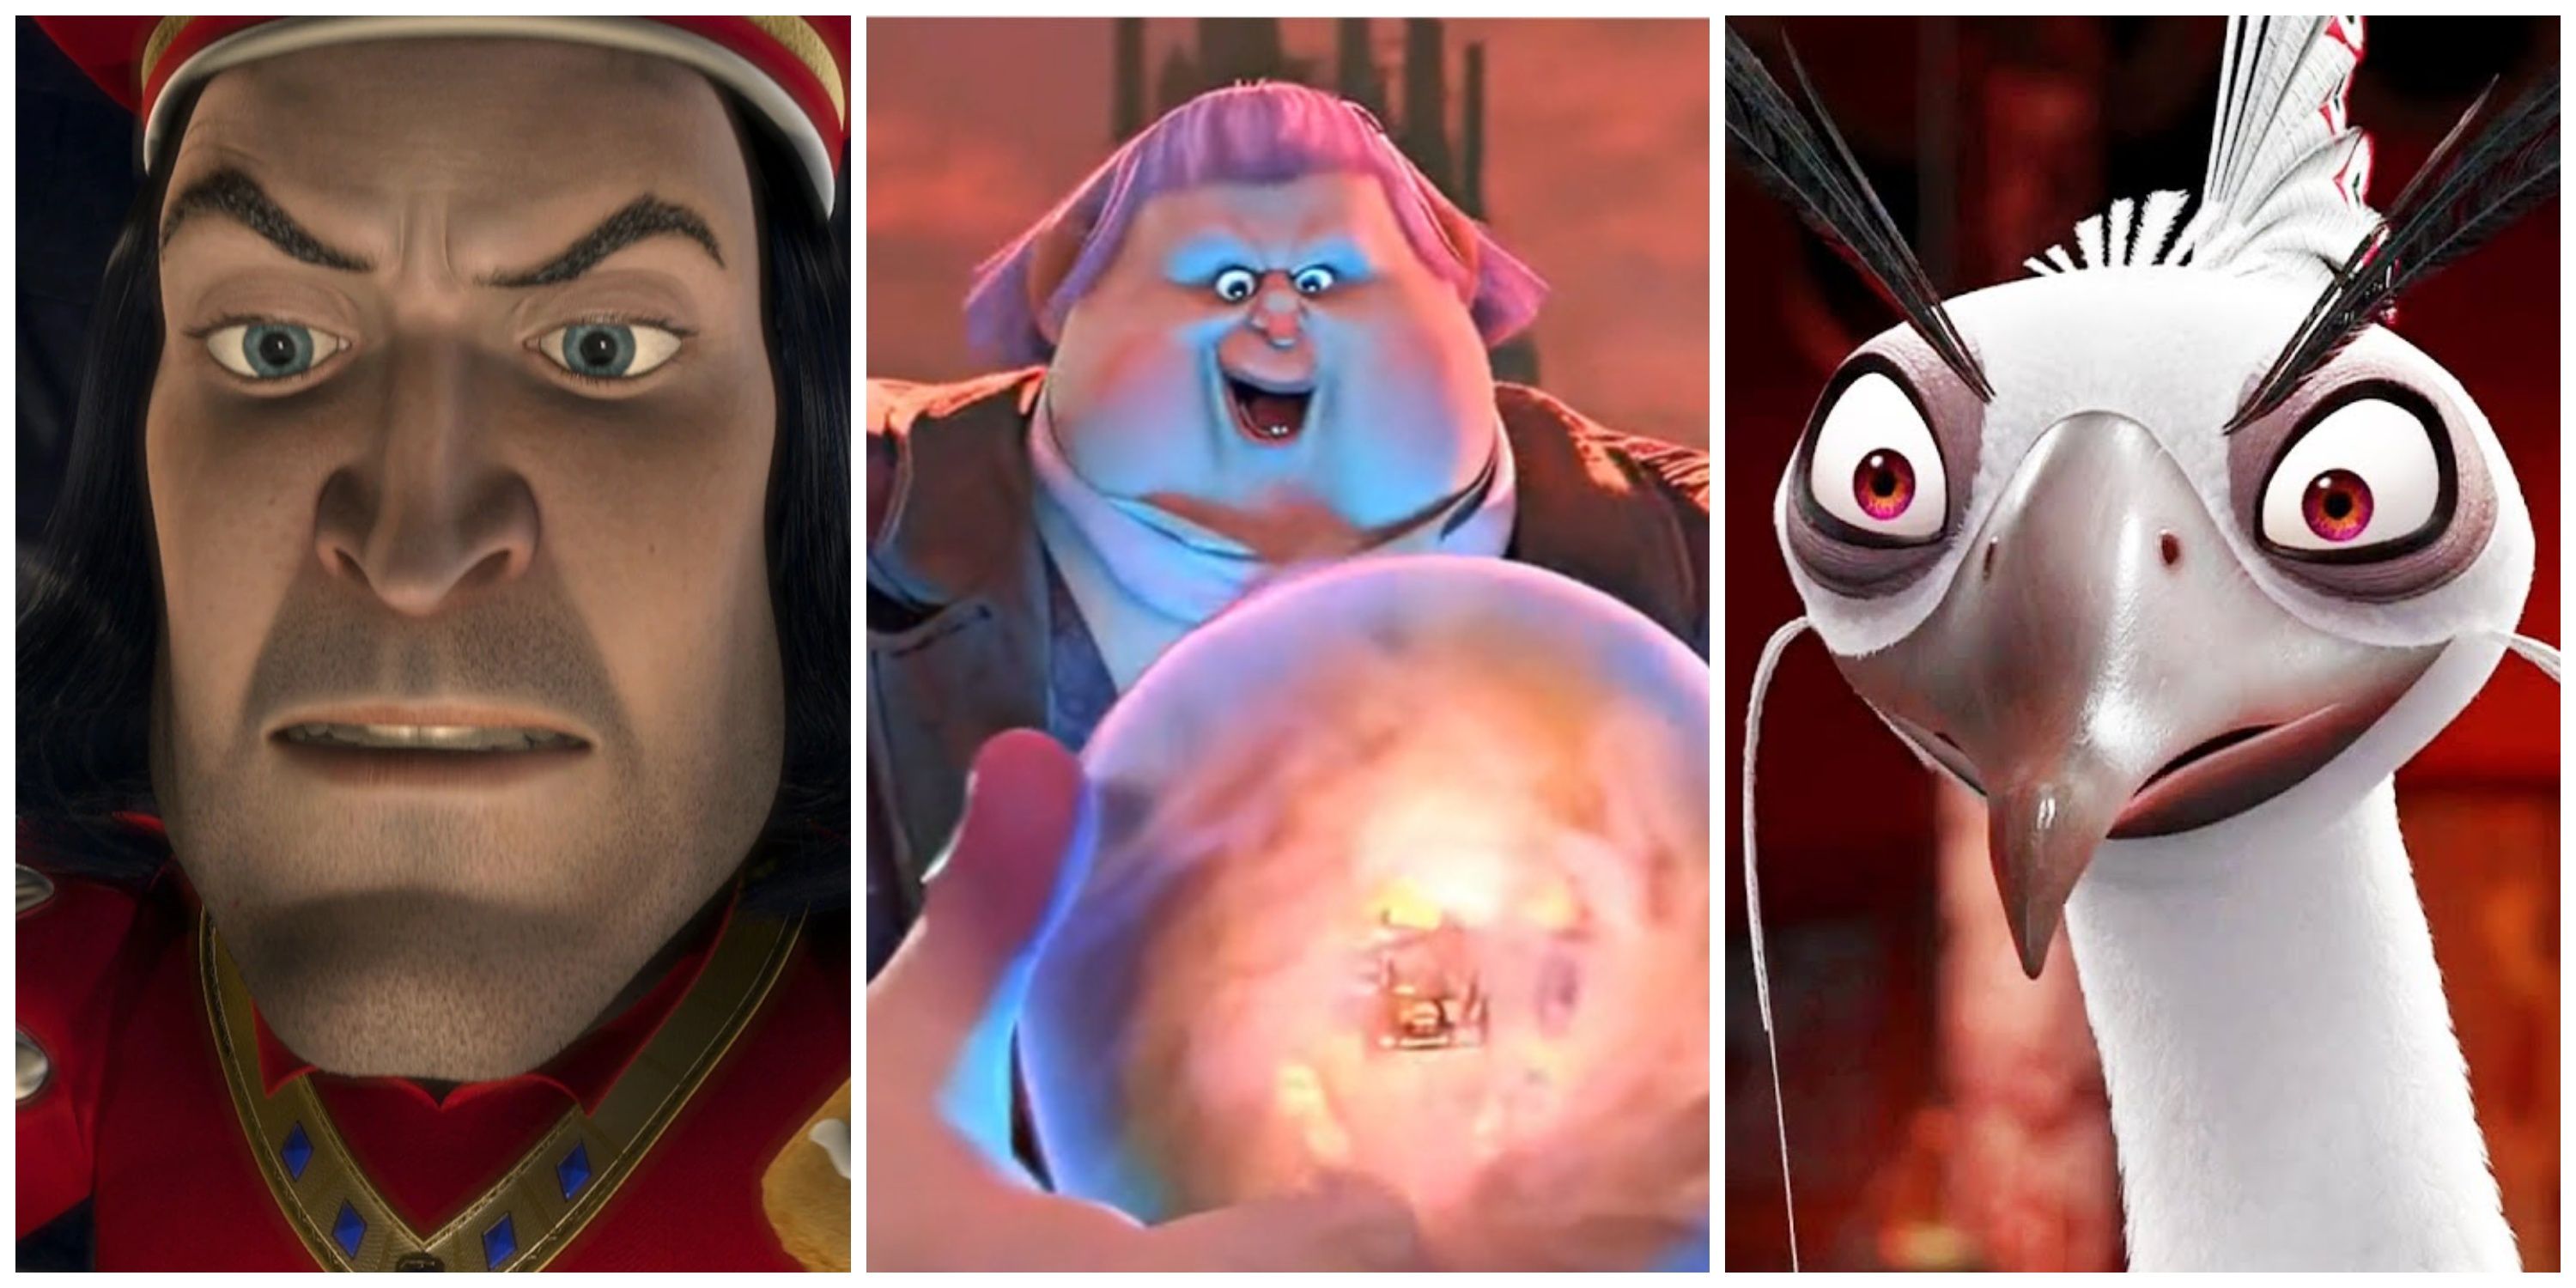 lord Farquaad, lord shen, jack horner from dreamworks movies 